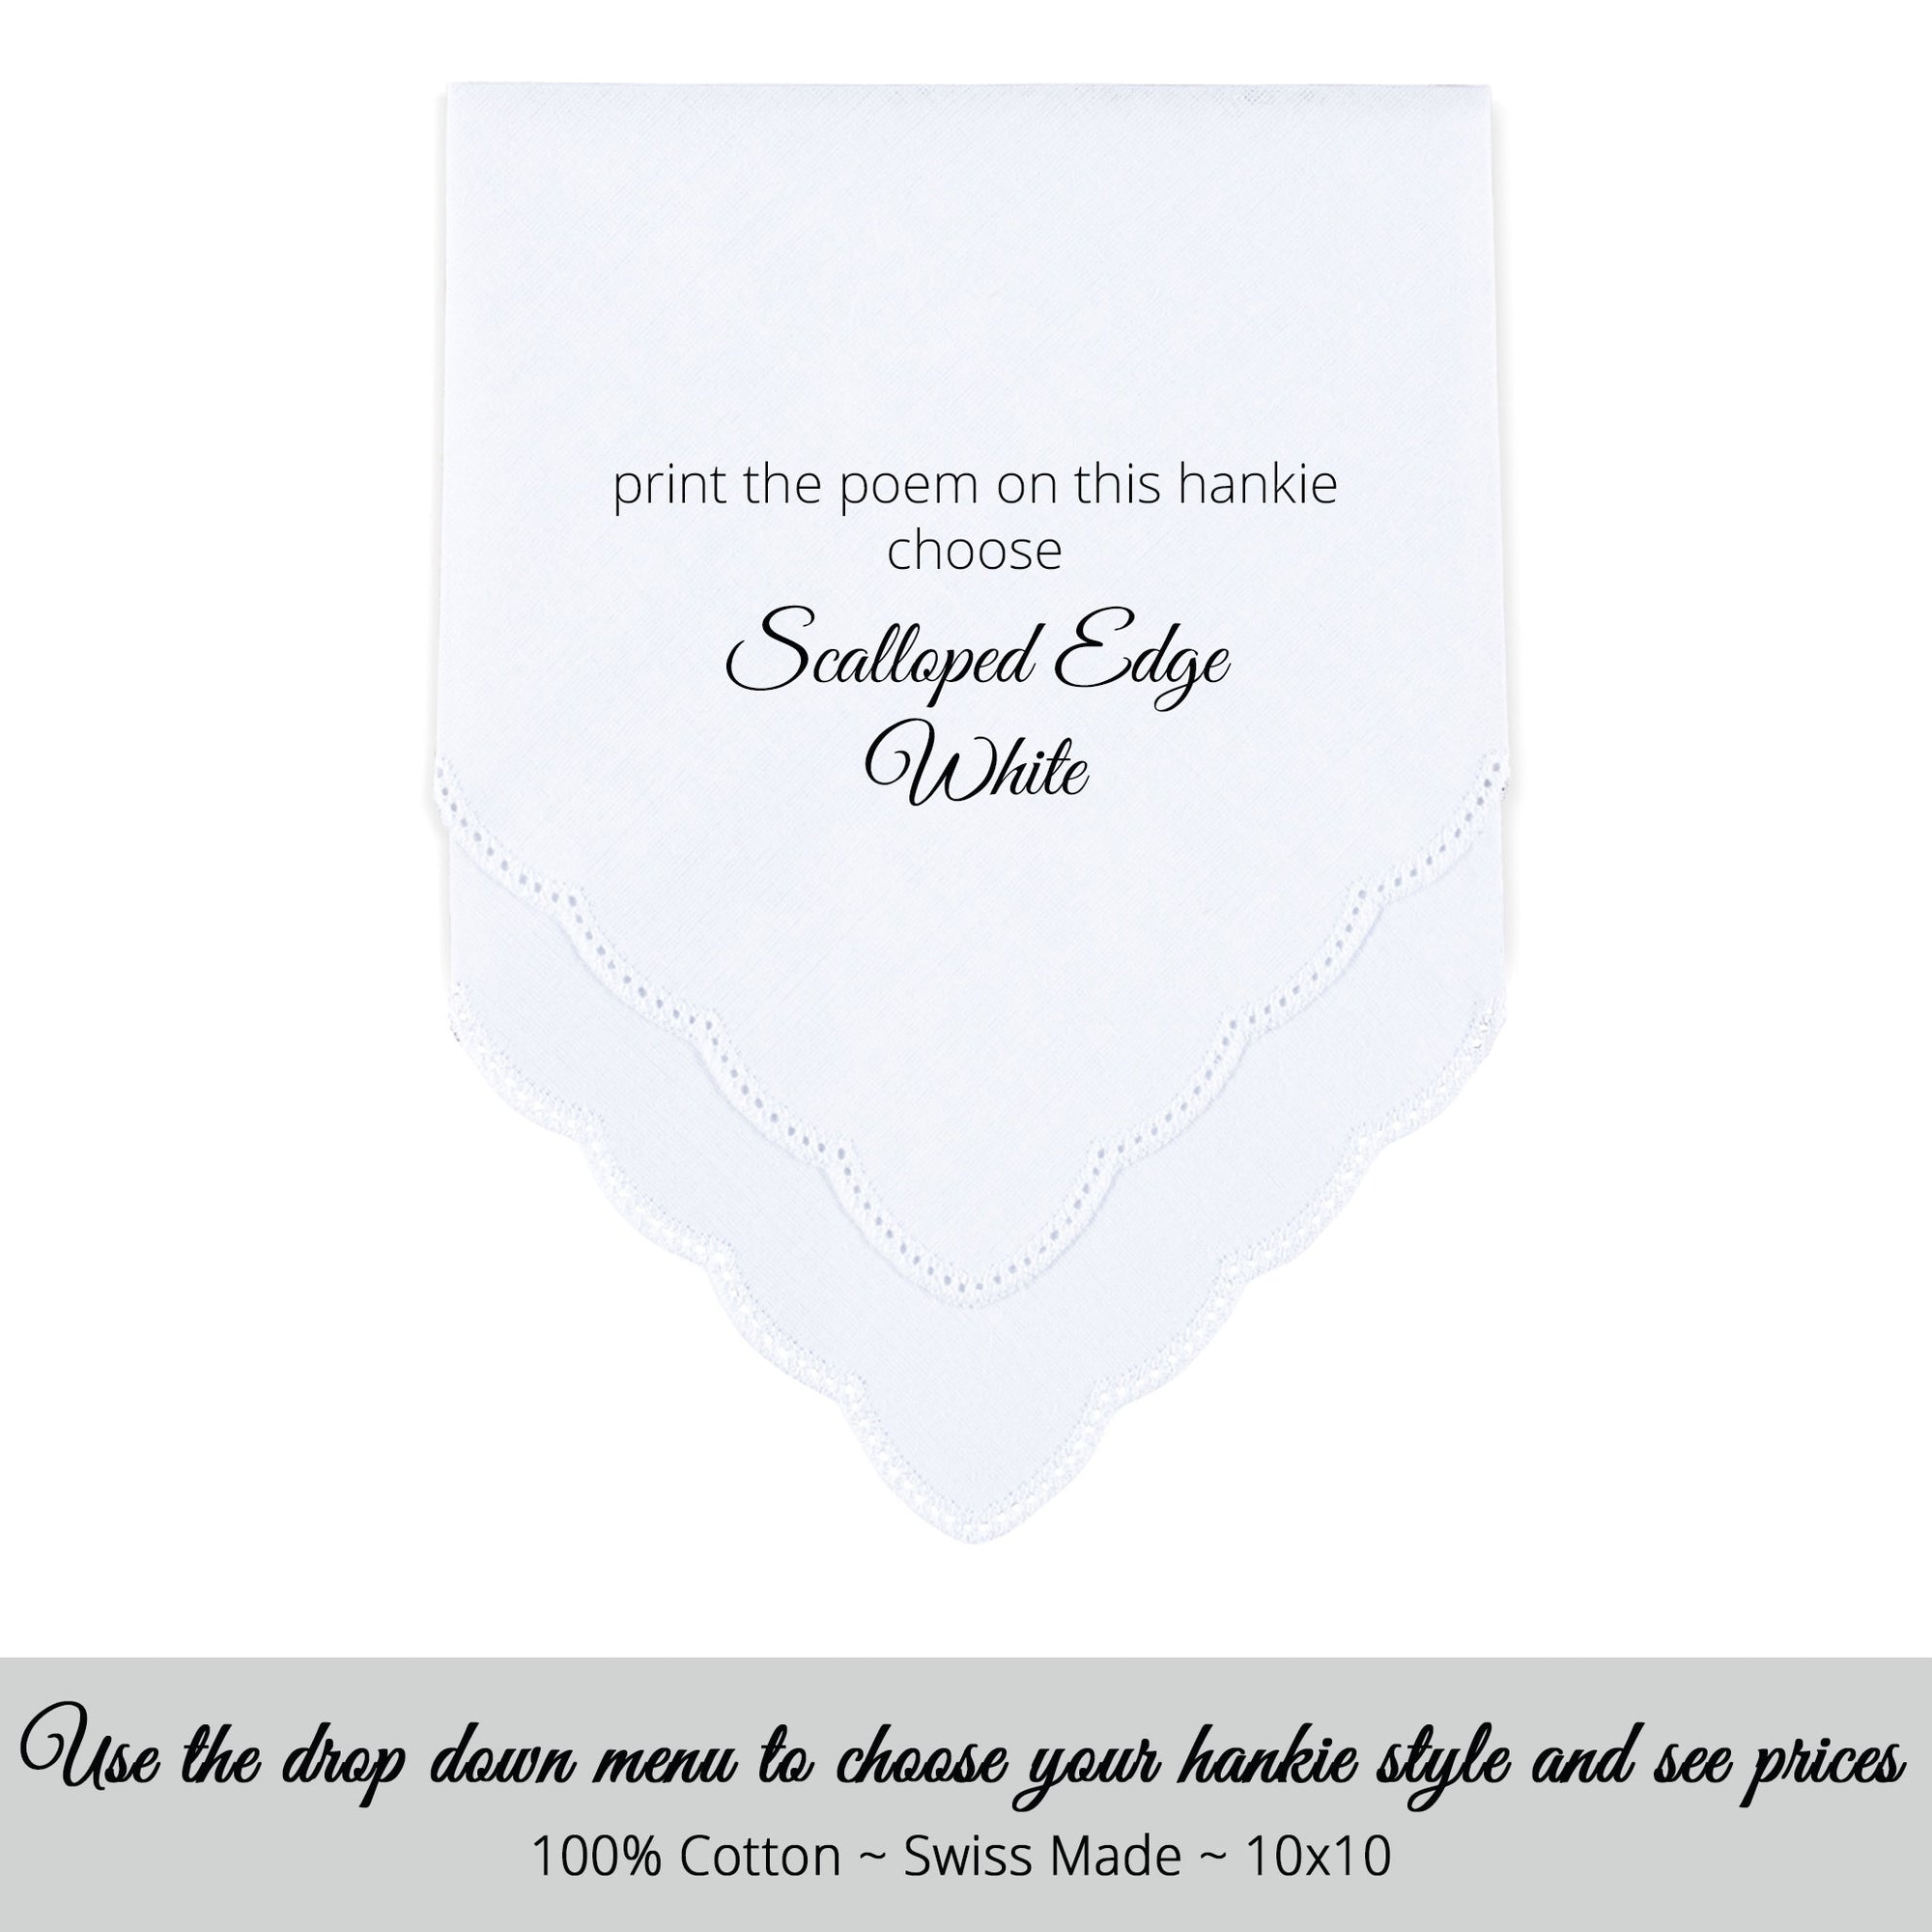 Wedding Handkerchief Scalloped edge white personalized poem for the sister in law bridesmaid